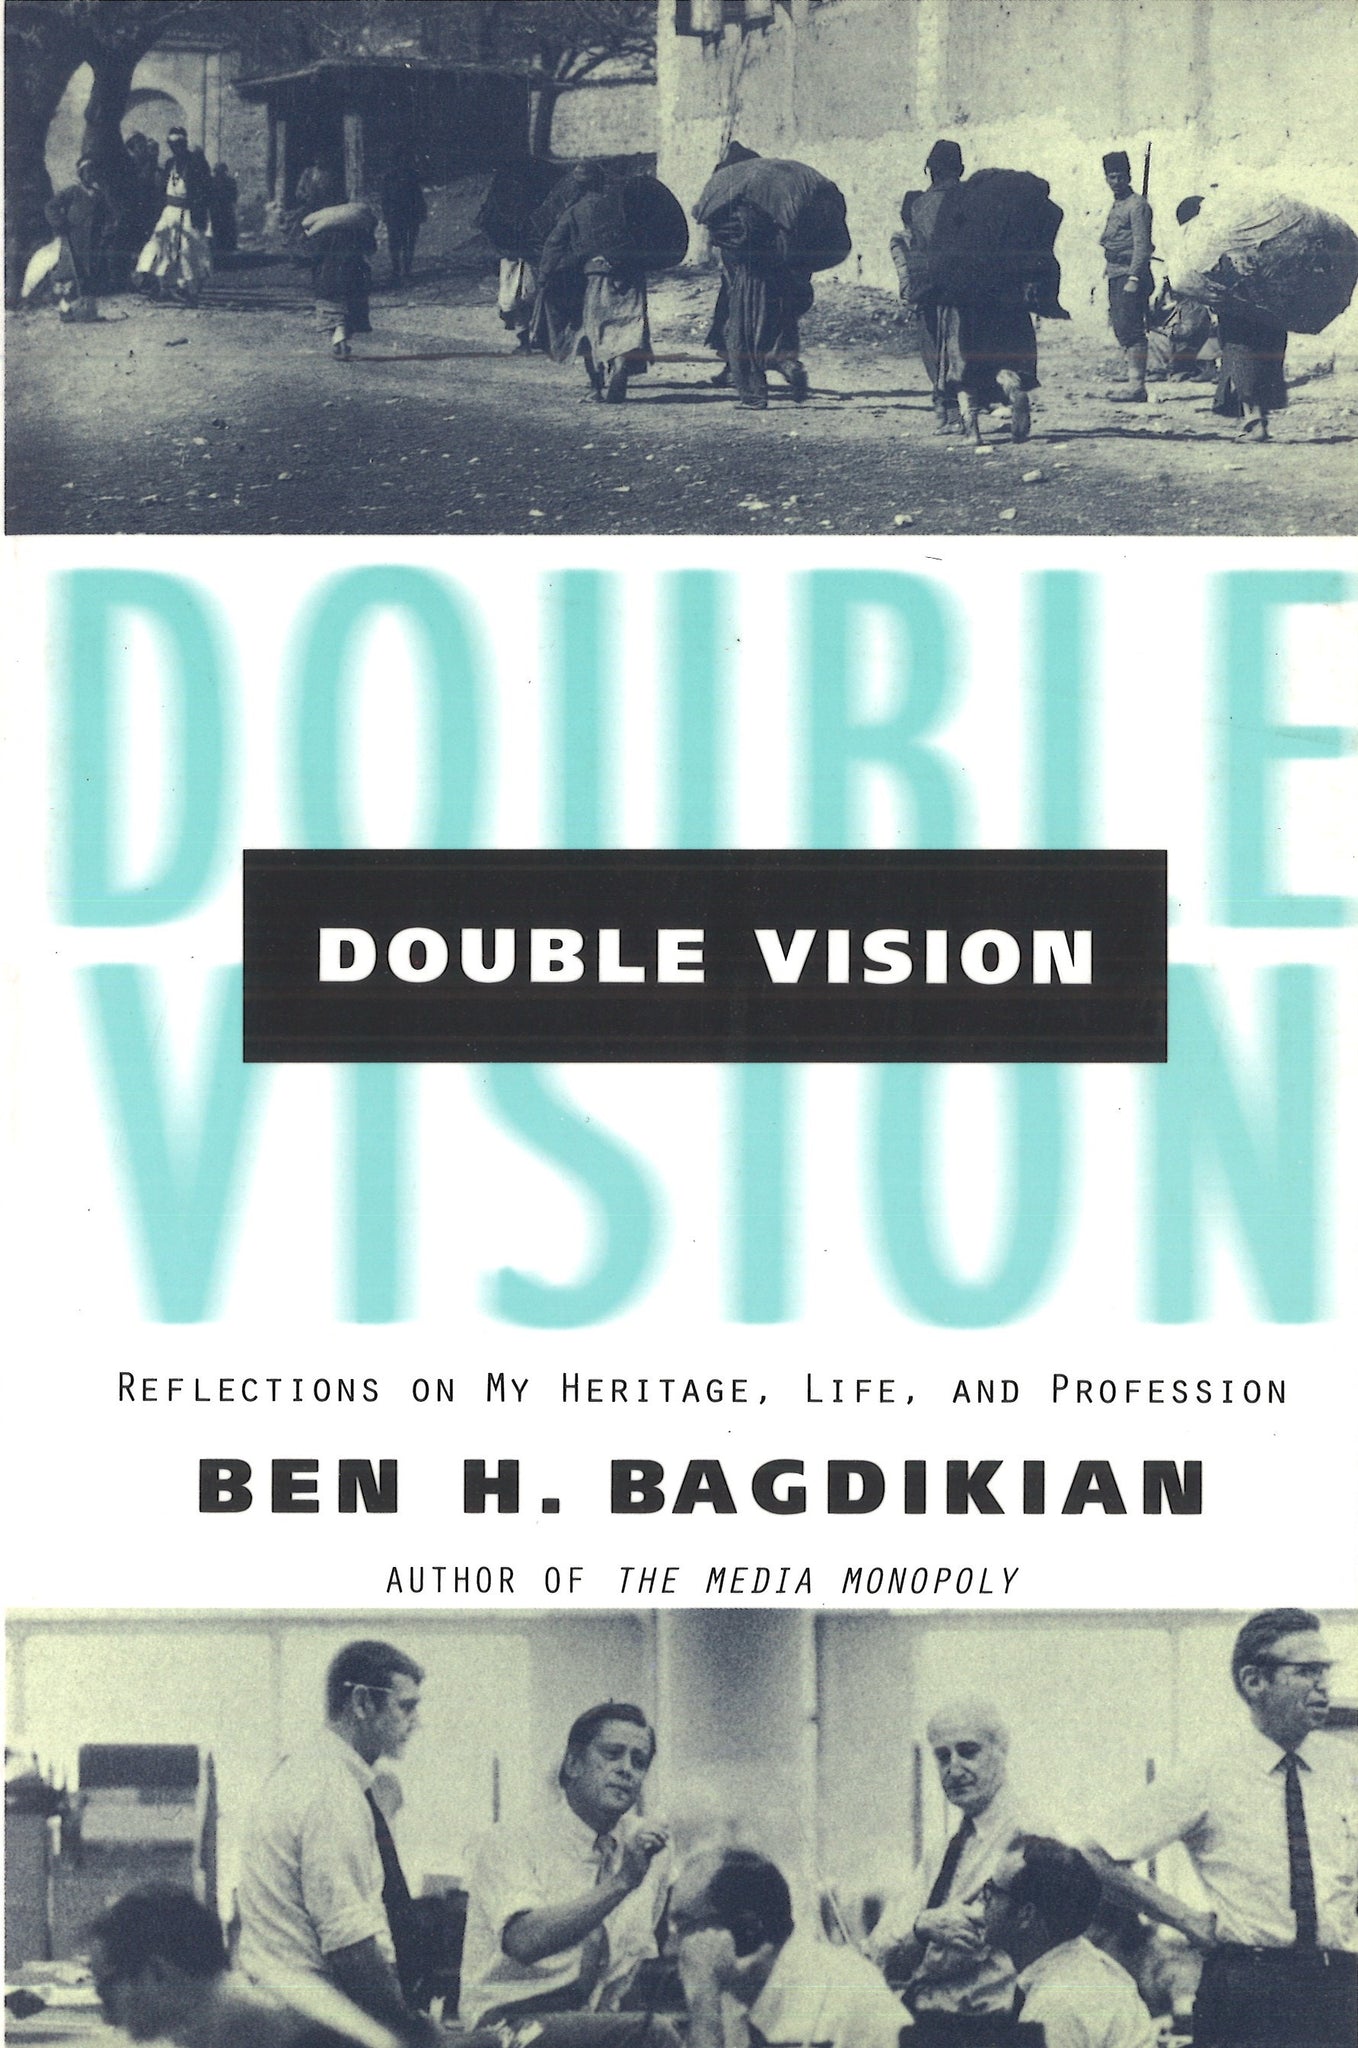 DOUBLE VISION: Reflections on My Heritage, Life, and Profession